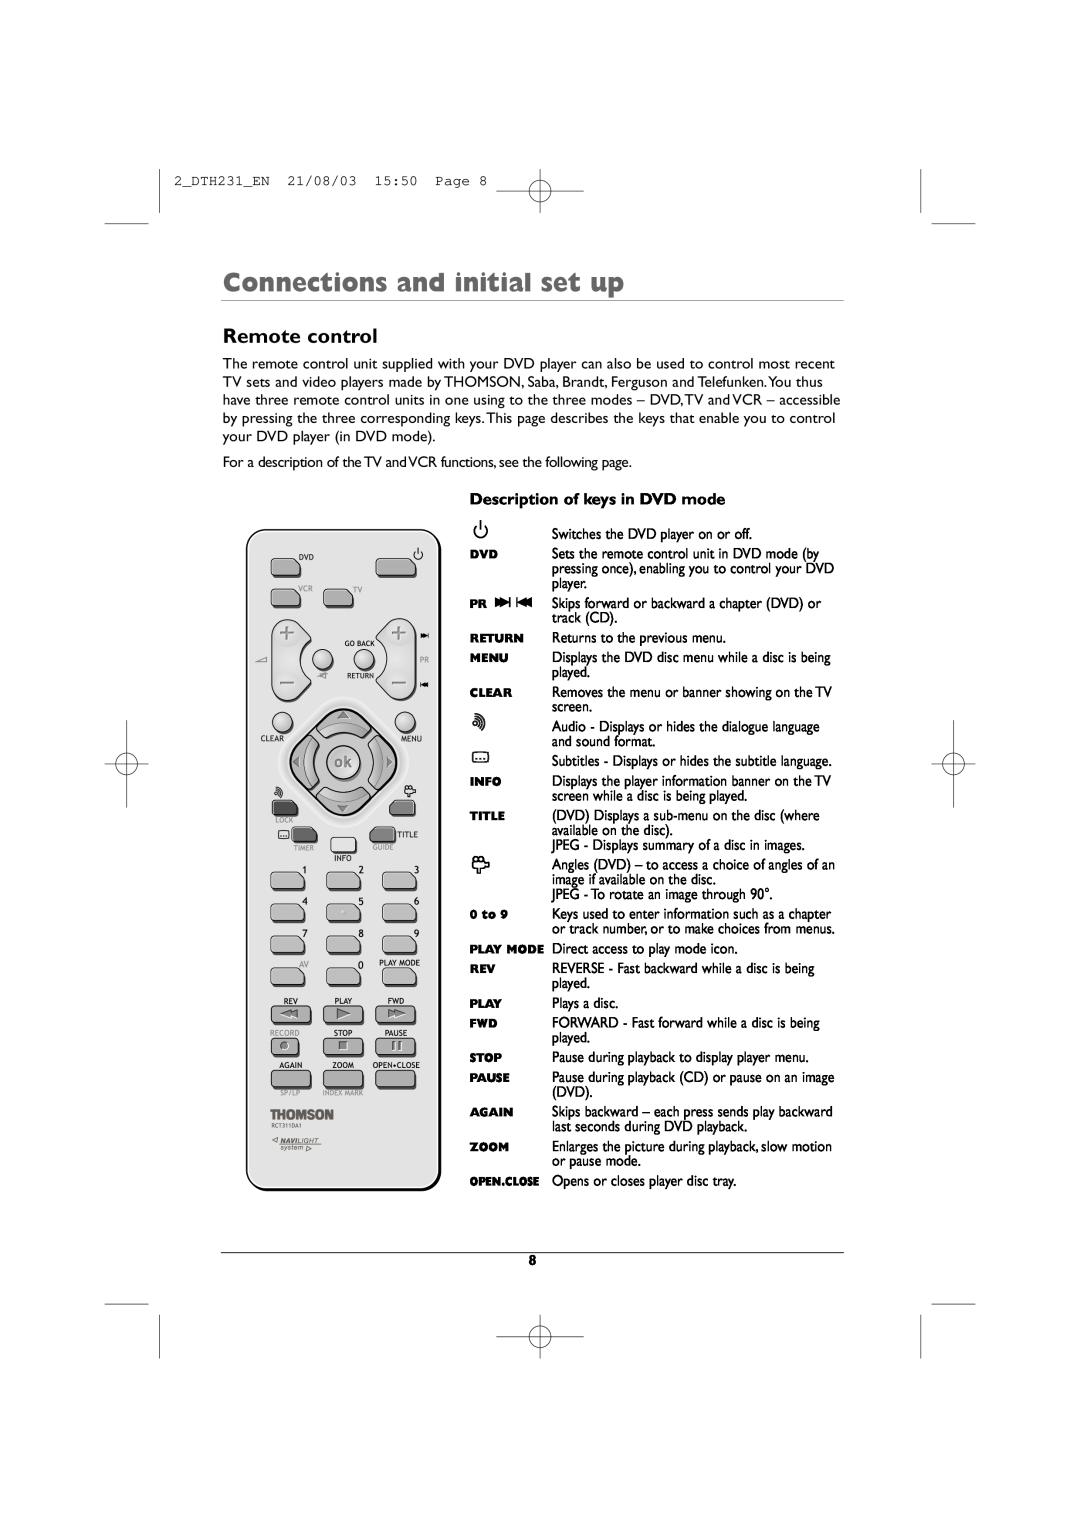 Technicolor - Thomson DTH231 manual Remote control, Description of keys in DVD mode, Connections and initial set up, played 